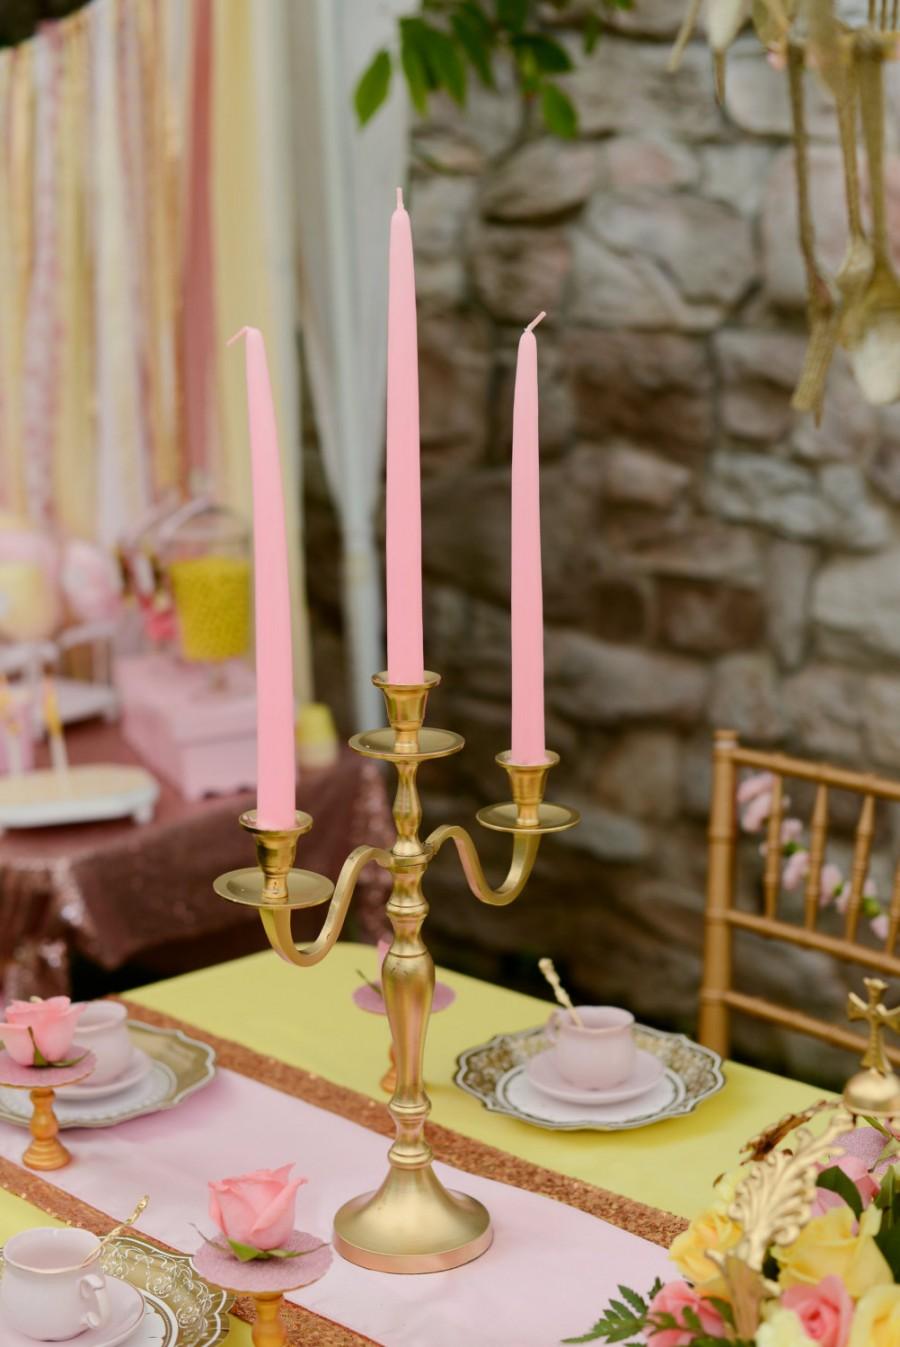 Wedding - Gold Wedding Candle Candelabras 3 arm Shabby Candle Holder Party Candle Holder Birthday Candle Holder - $25.00 USD